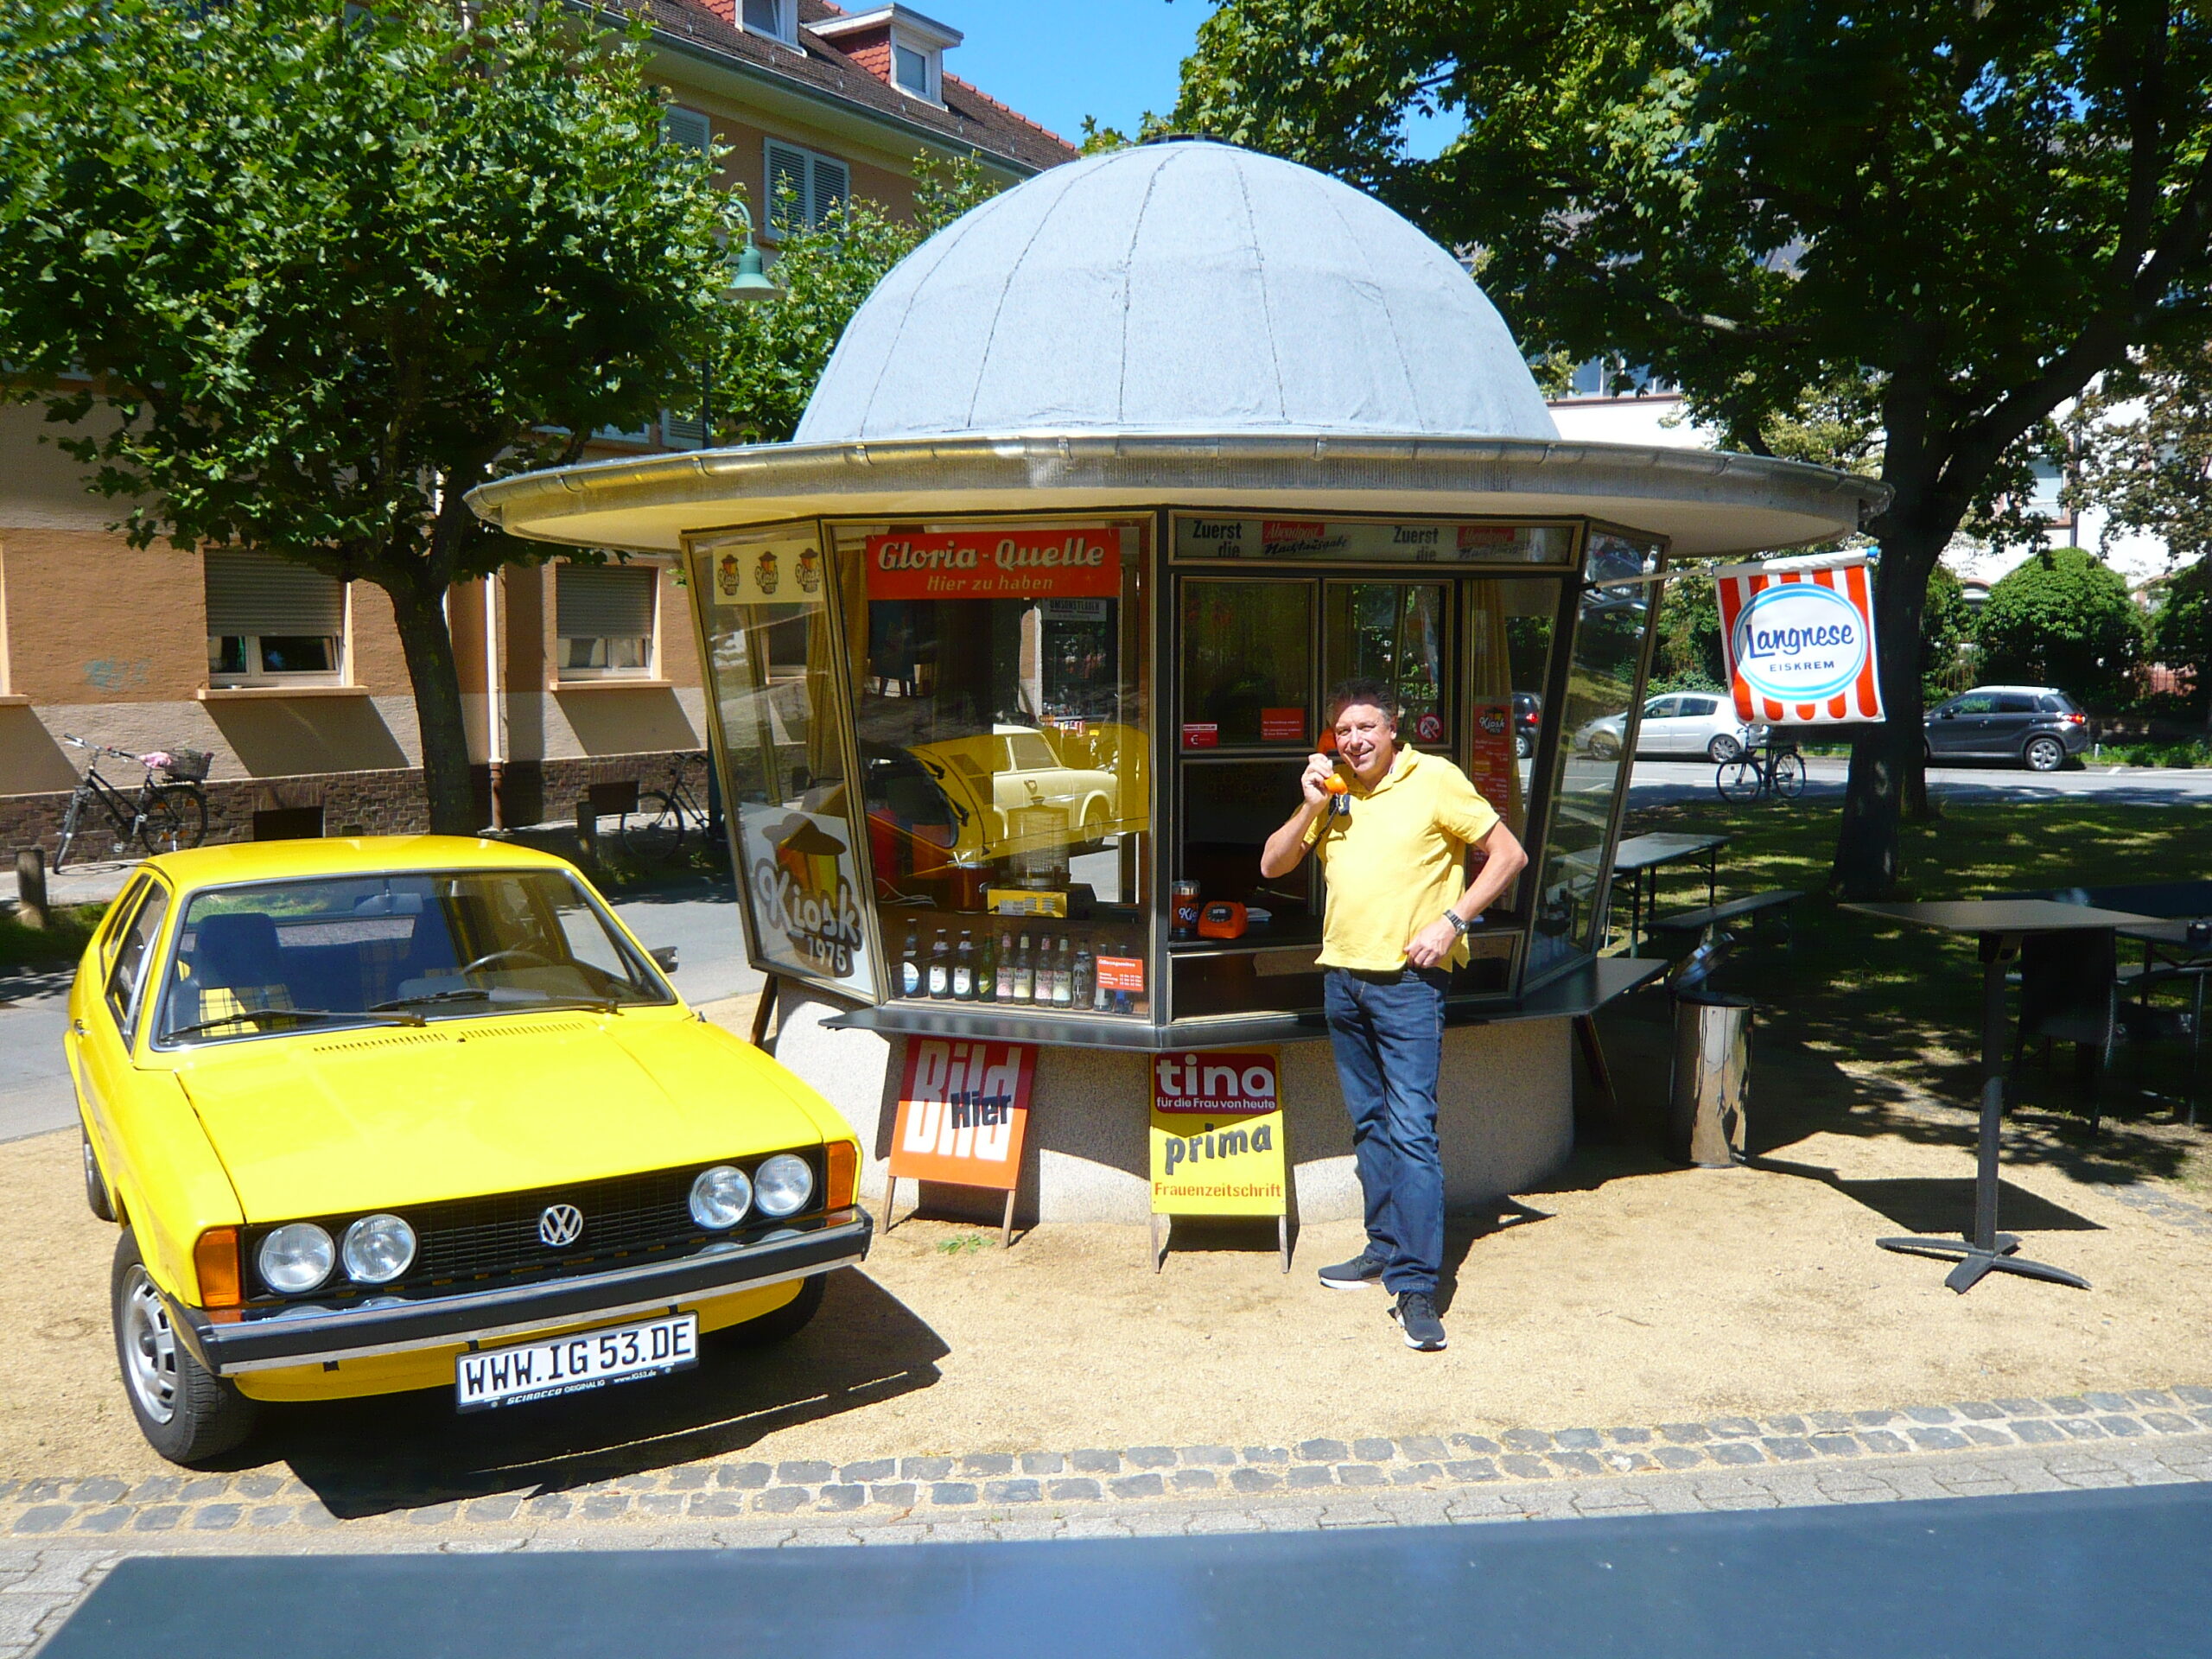 You are currently viewing Kiosk 1975: Cooles Foto-Shooting mit 75´er Kult-Auto :-)